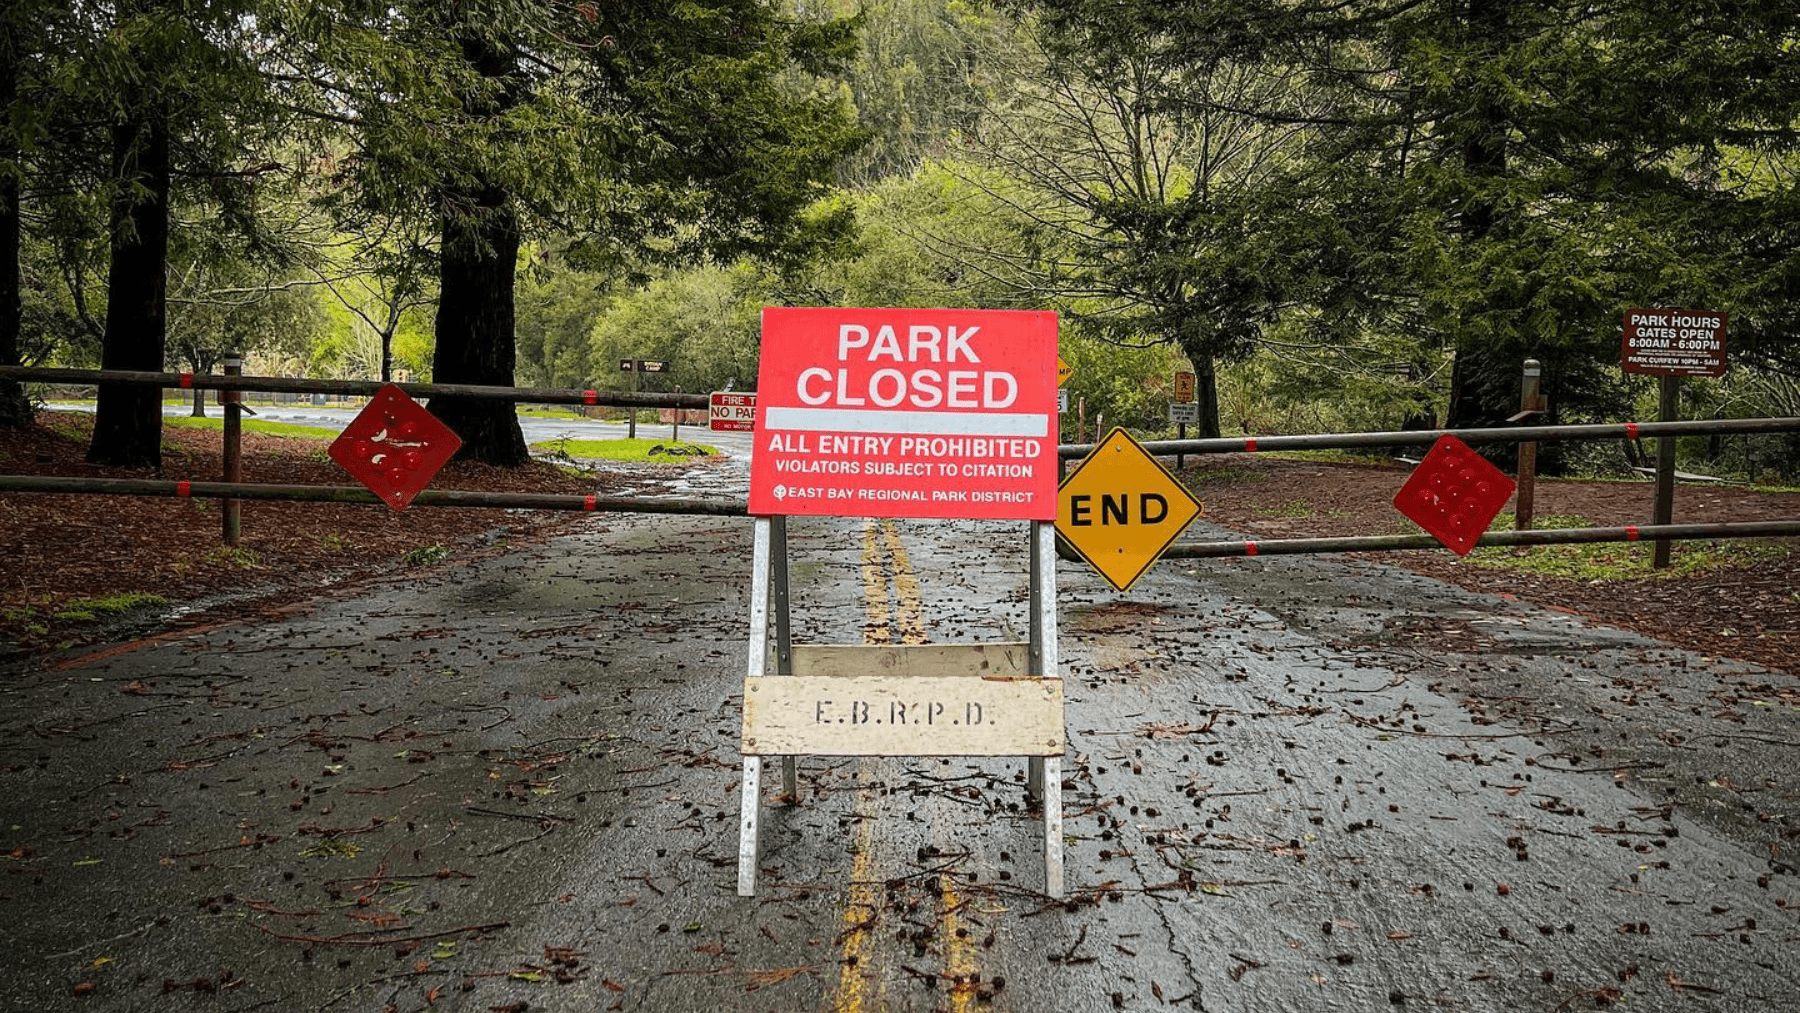 Closed park sign